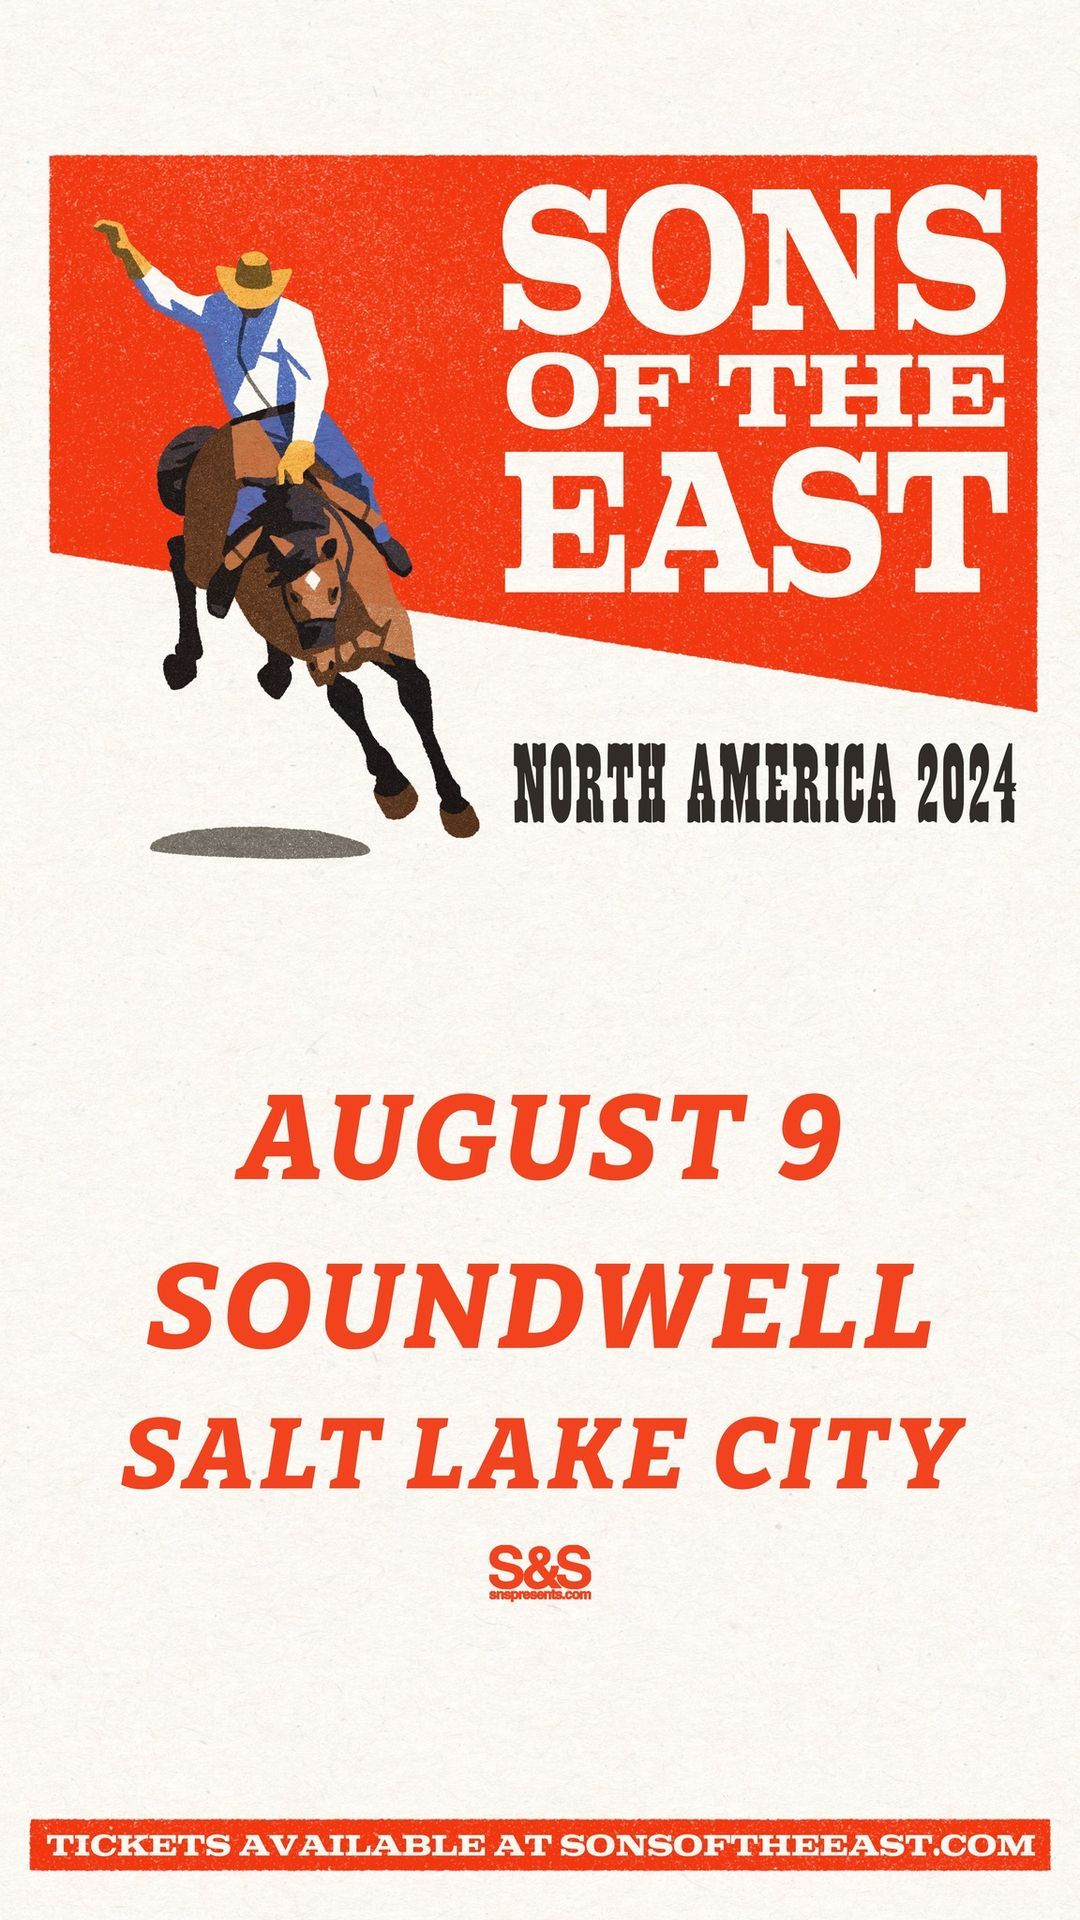 Sons of the East at Soundwell